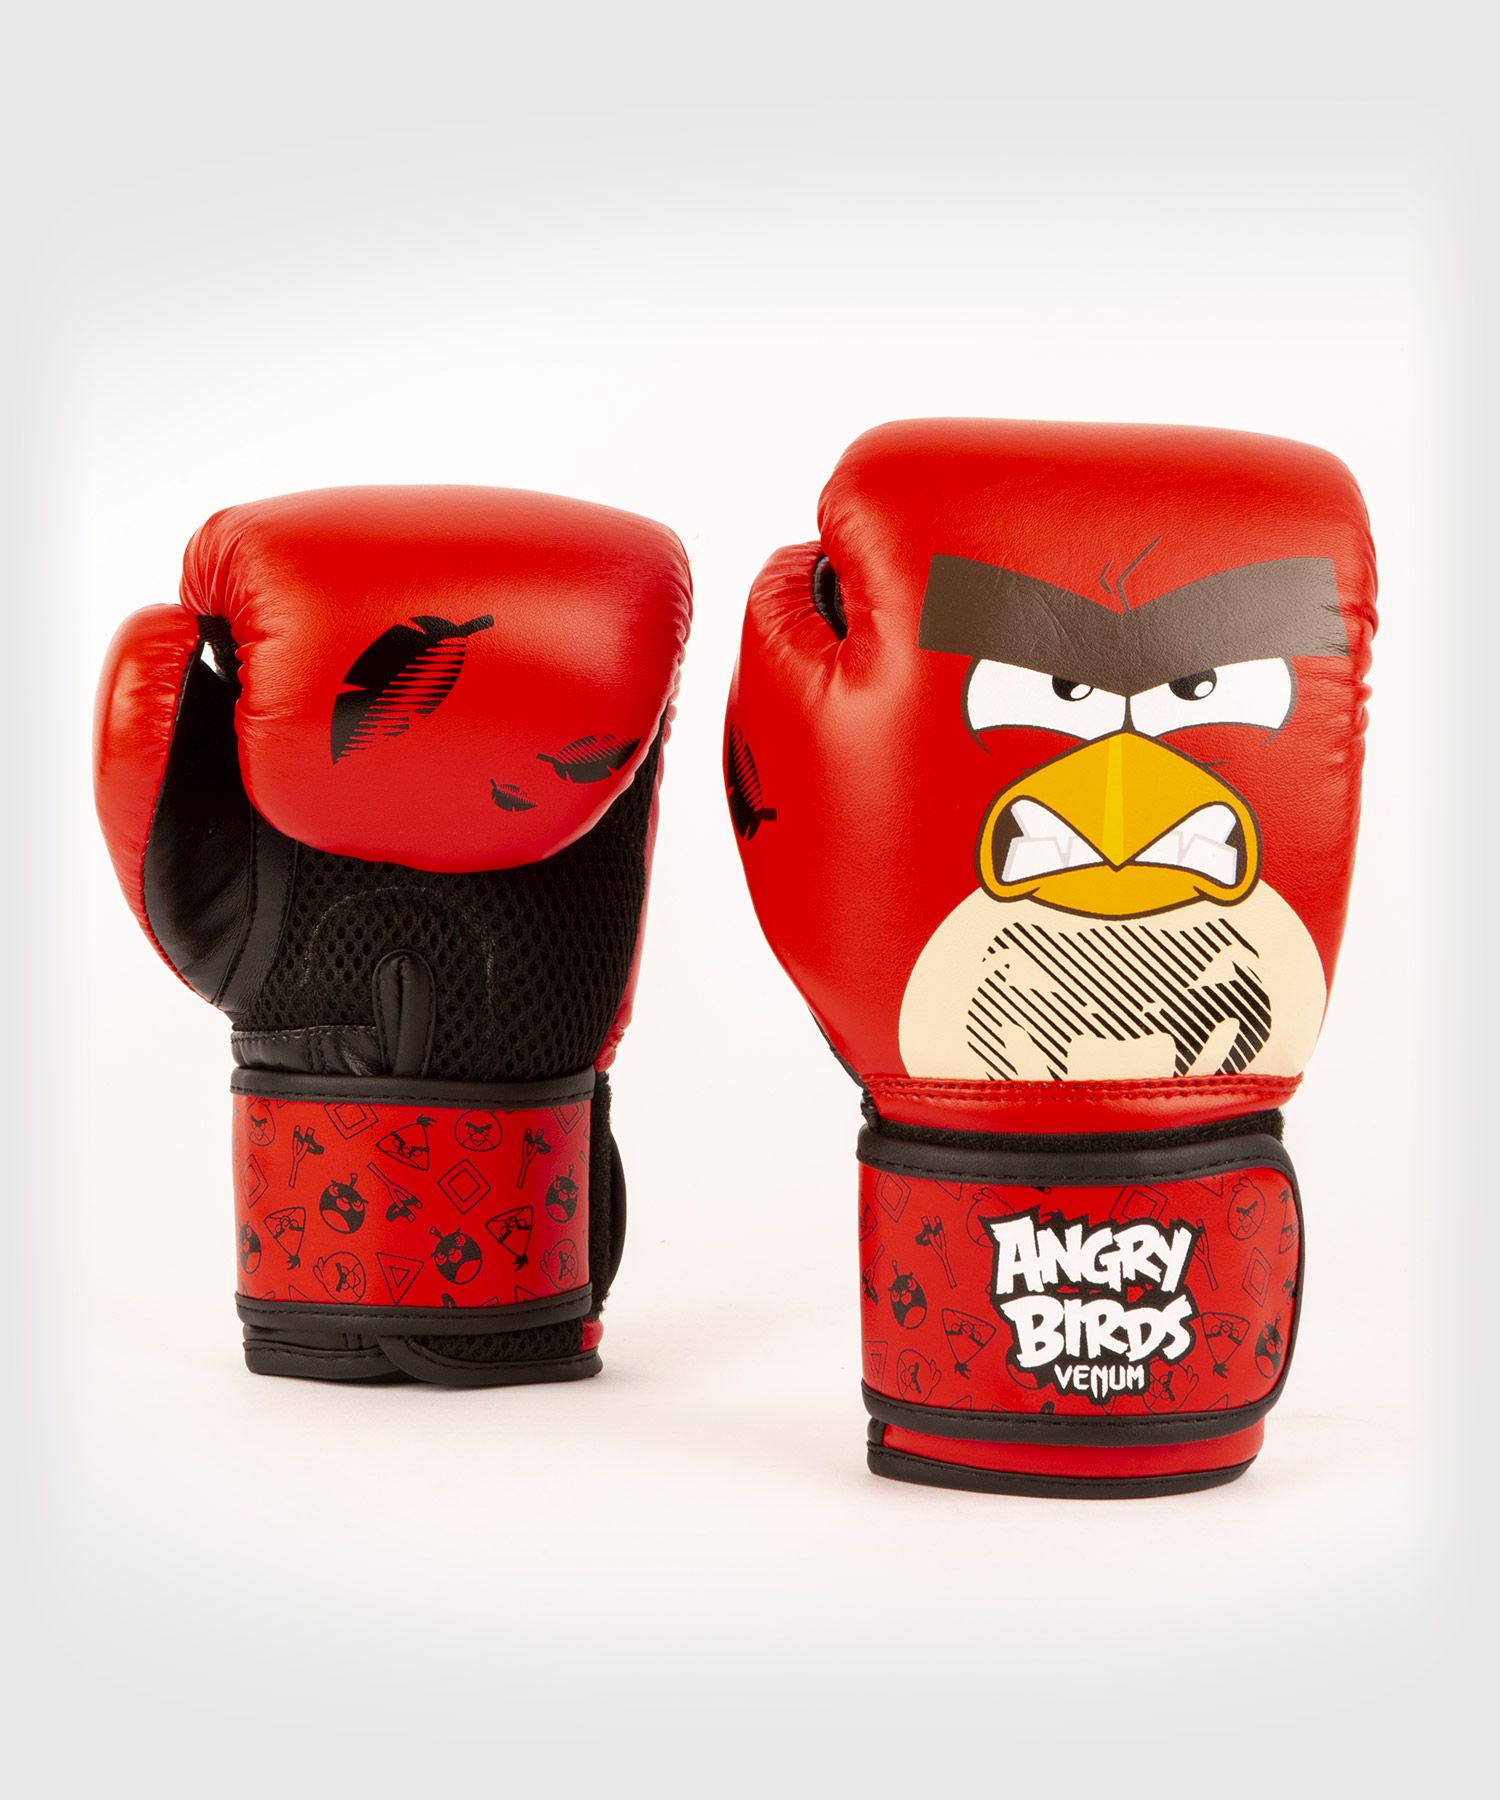 Angry Birds Boxing Gloves by Venum Kids - Red